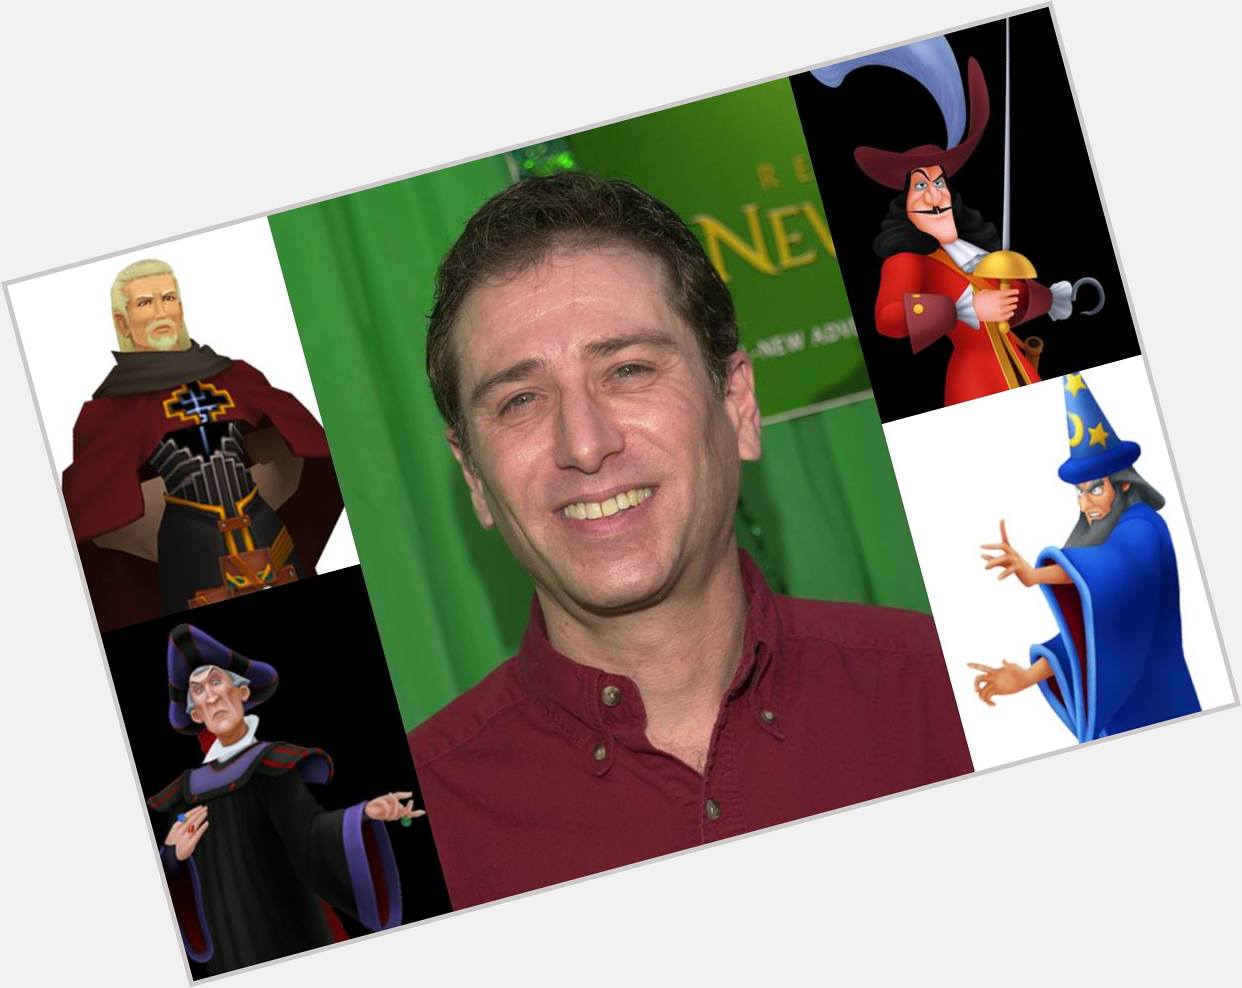  Happy 60th birthday to Corey Burton who voices many characters like Yen Sid, Captain Hook, & Ansem the Wise! 